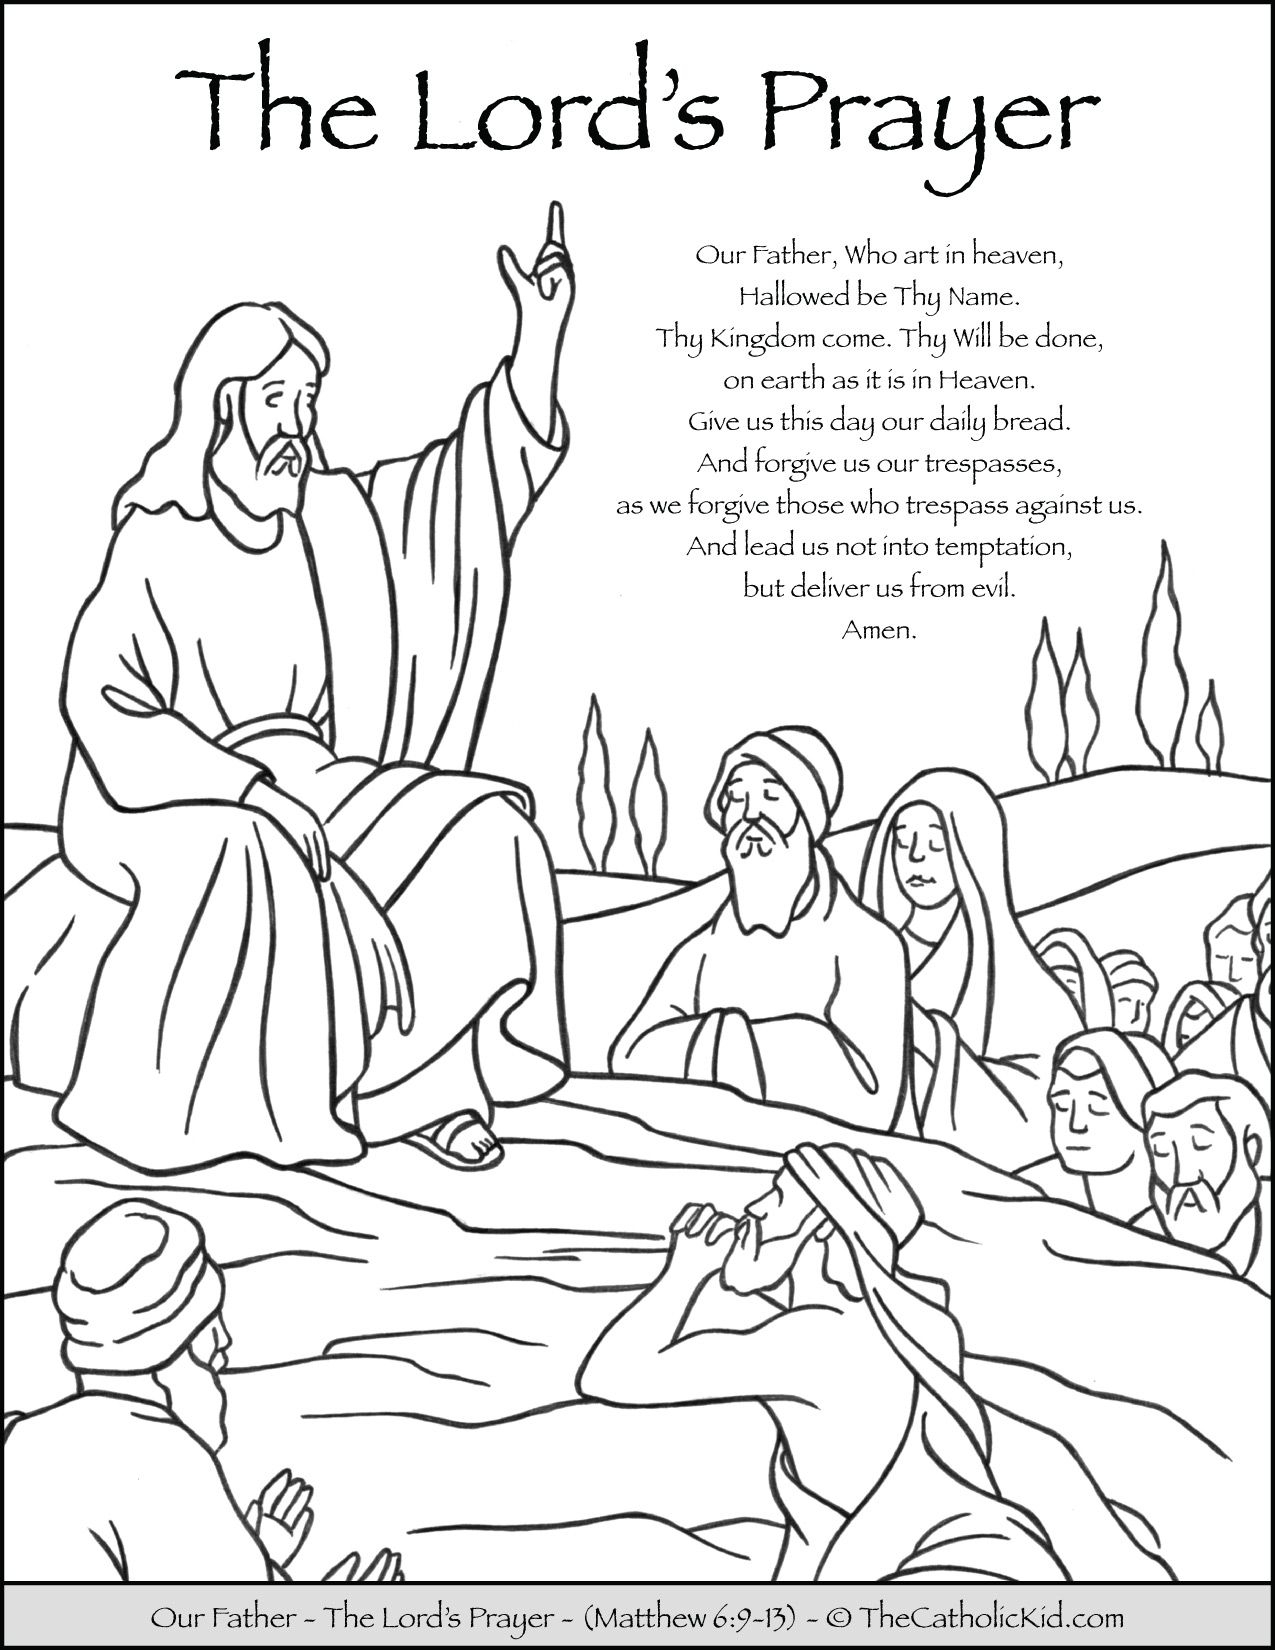 The Lord's Prayer - Our Father Prayer Coloring Page - TheCatholicKid.com | Our  father prayer, Prayer for fathers, The lords prayer